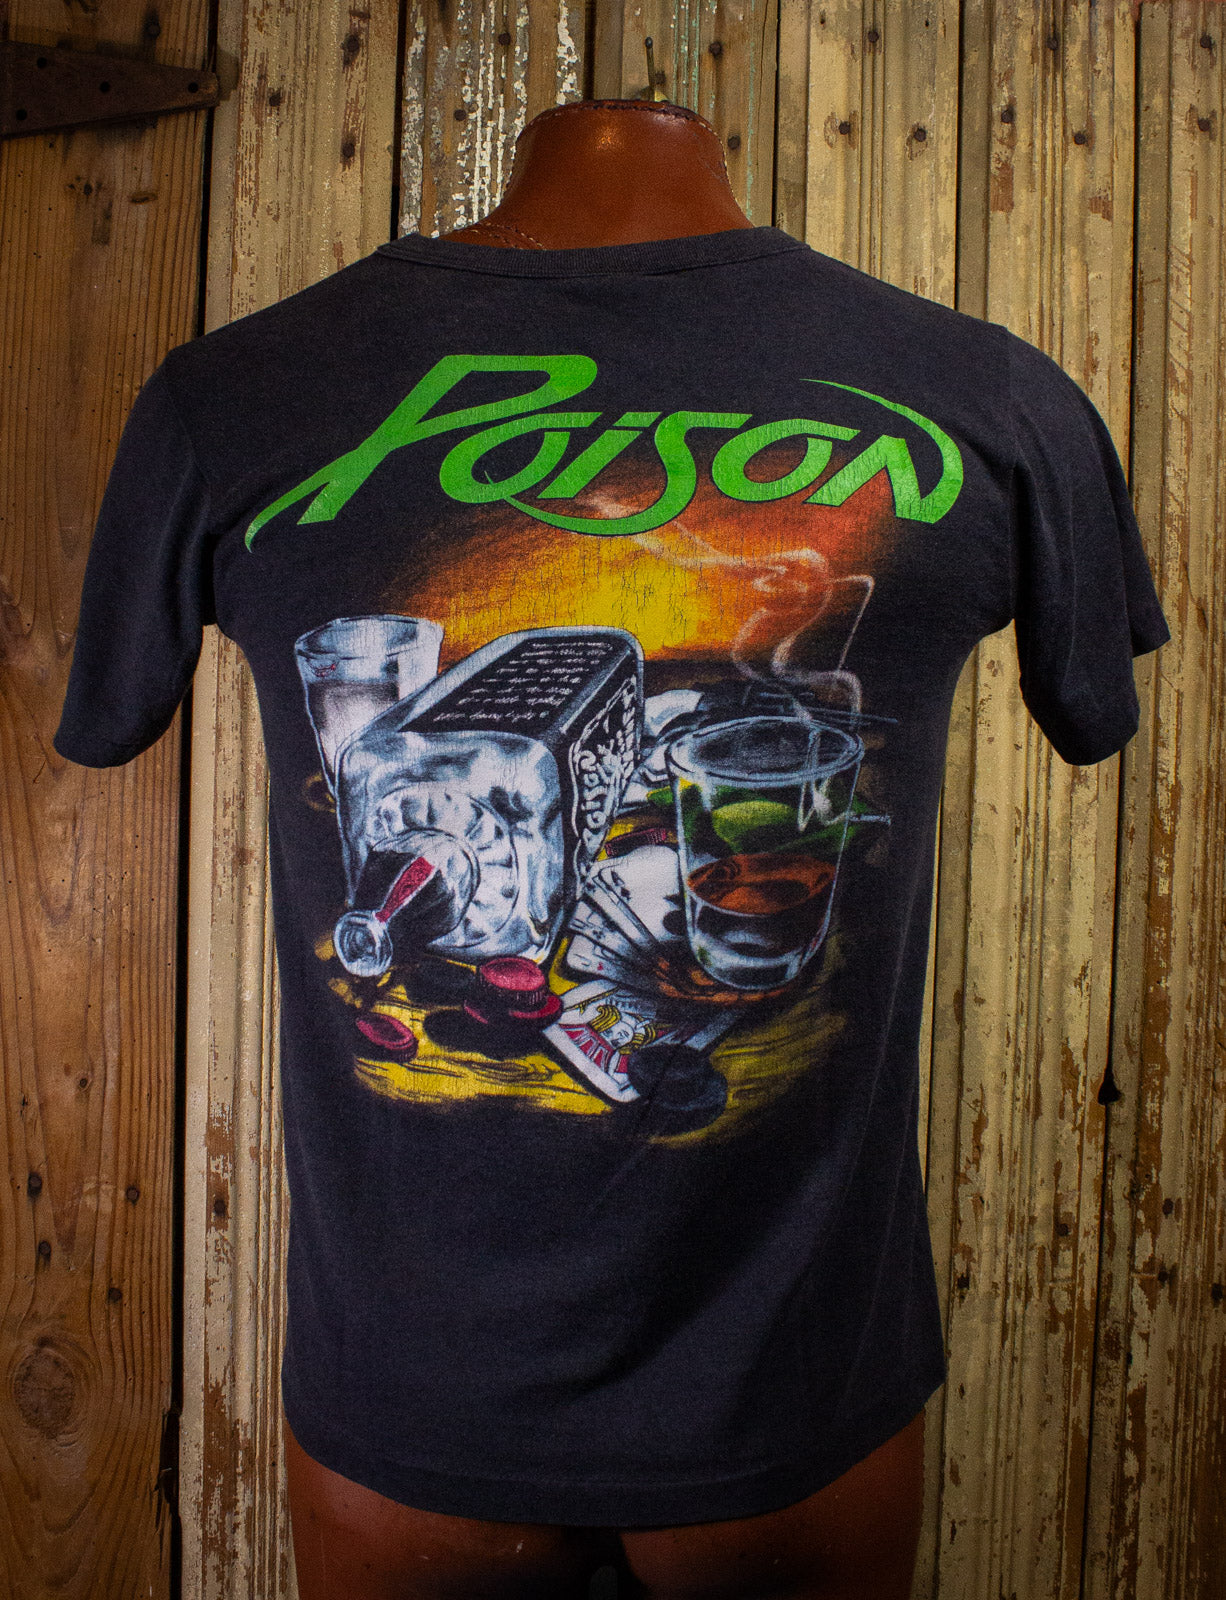 Vintage Poison Nothing But A Good Time Concert T shirt 1988 Large